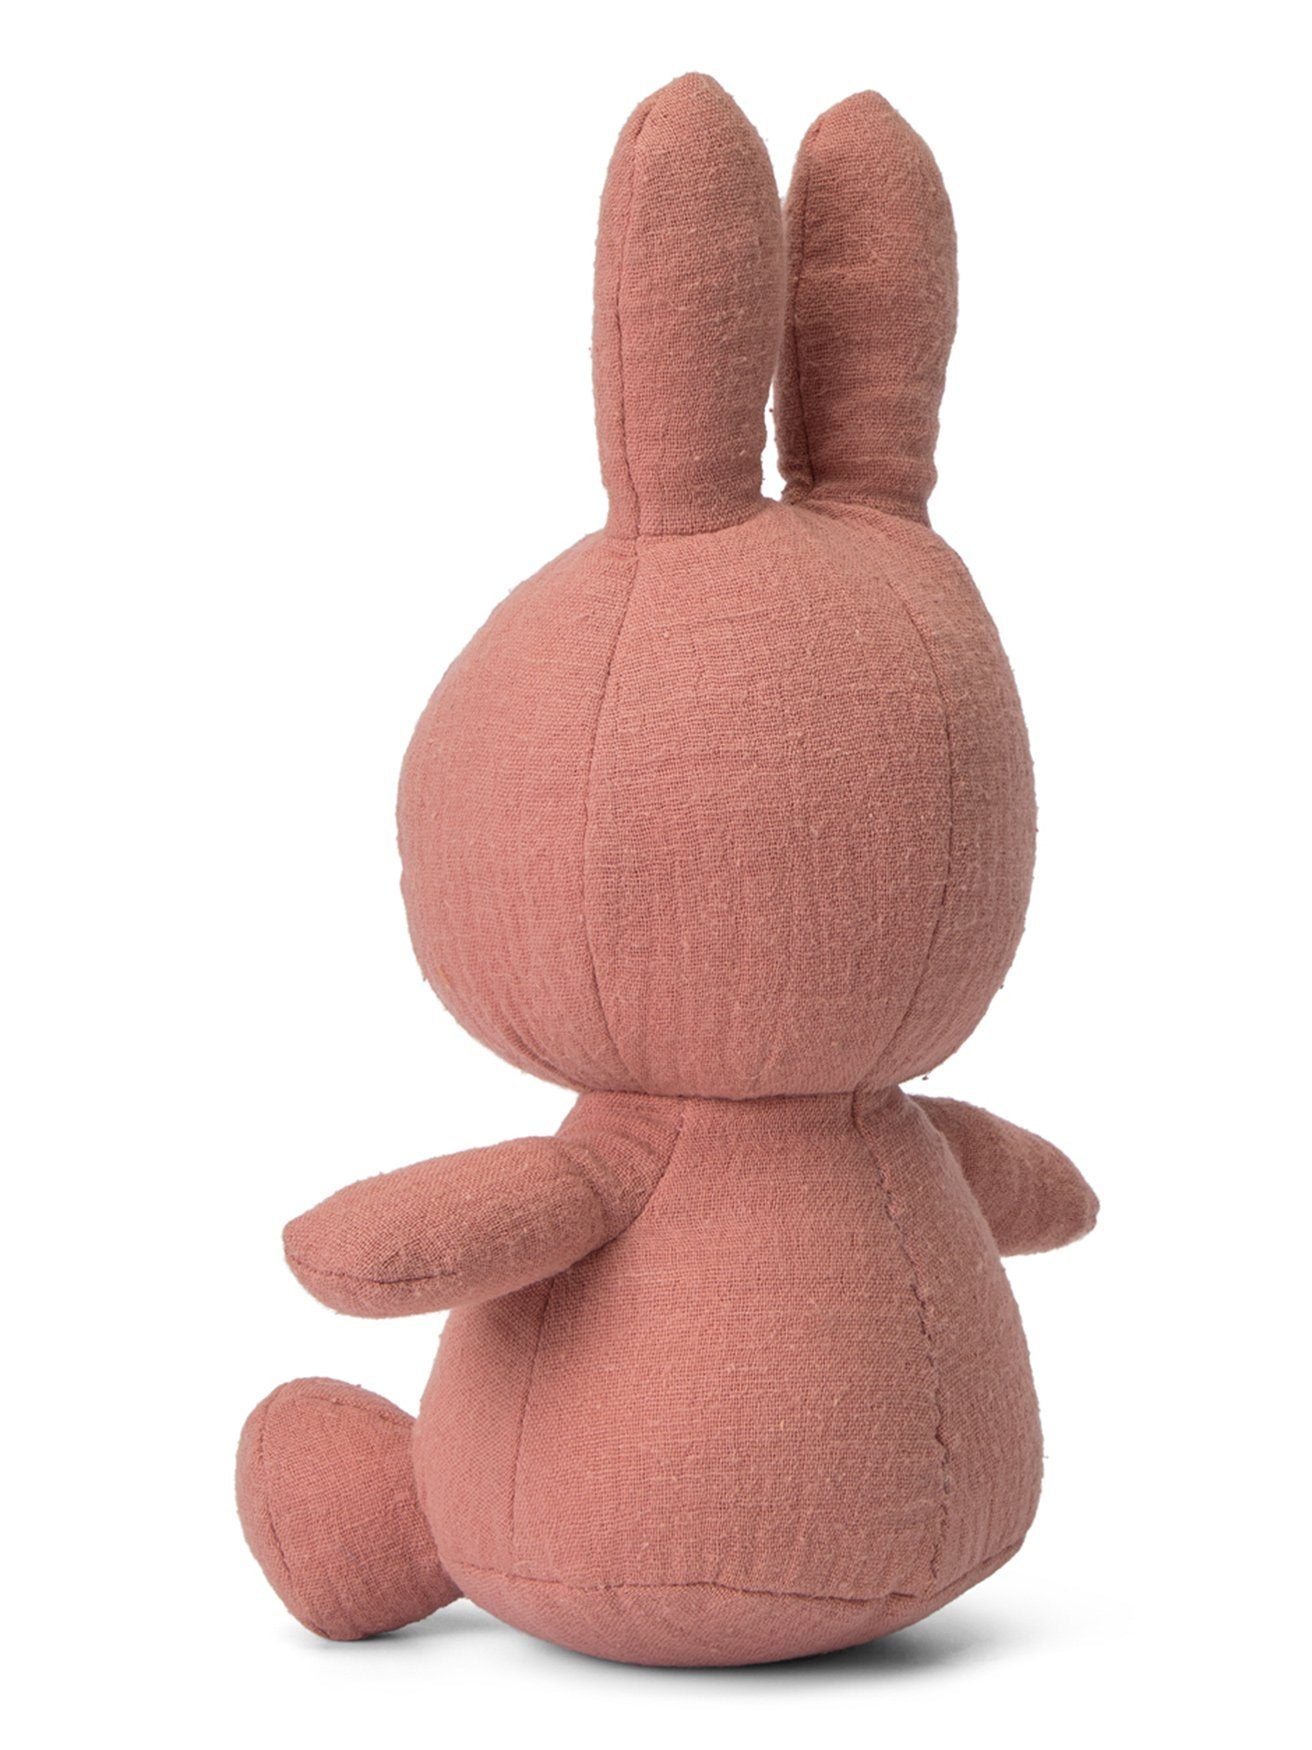 Miffy Muslin Plush Toy - Dusty Pink Toy Miffy 